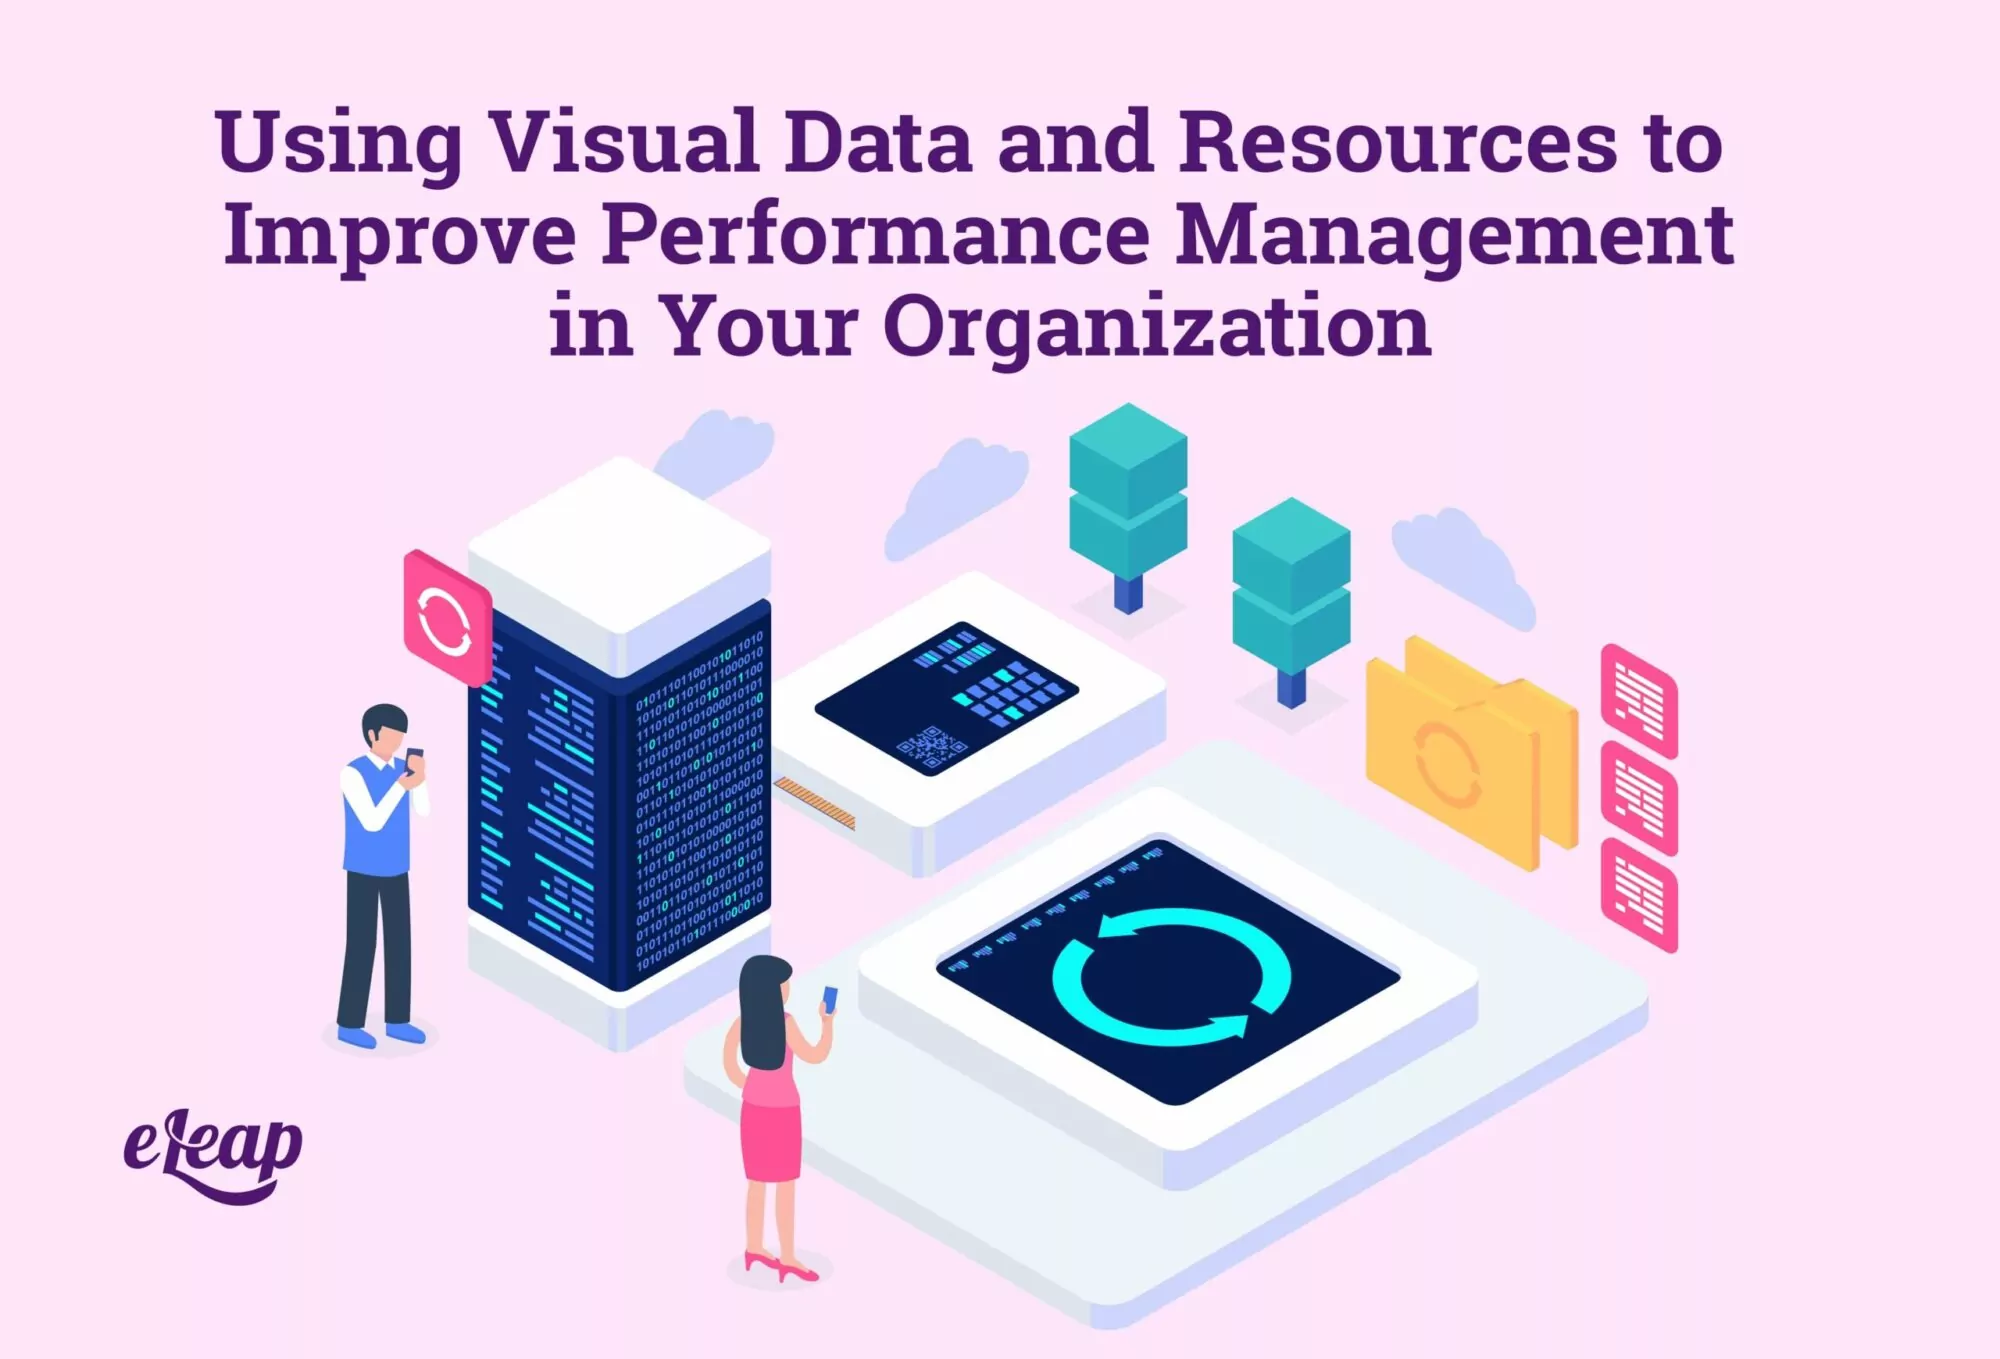 Using Visual Data and Resources to Improve Performance Management in Your Organization